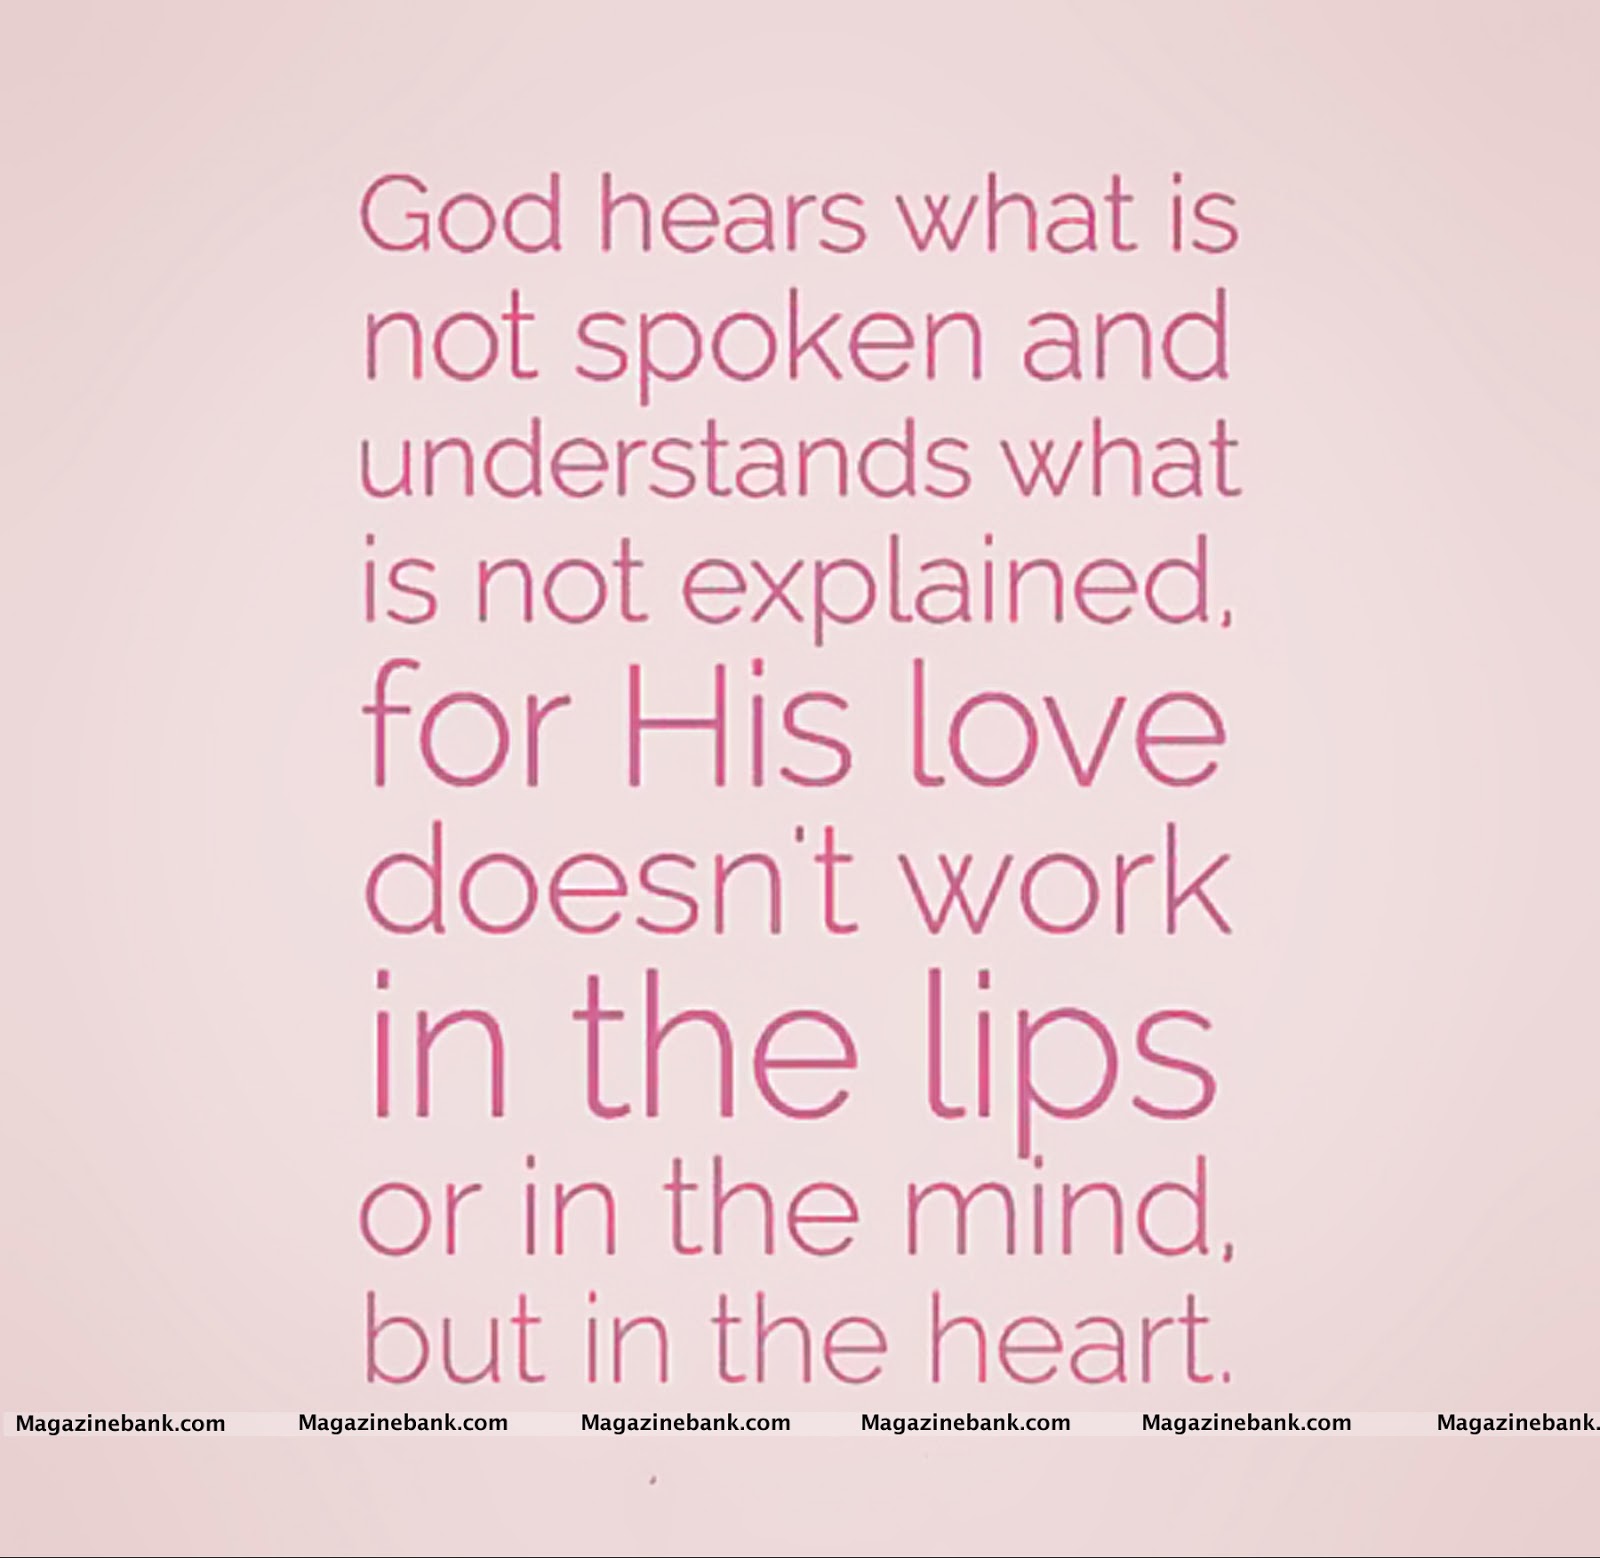 God hears what is not spoken and understands what is not explained for His love